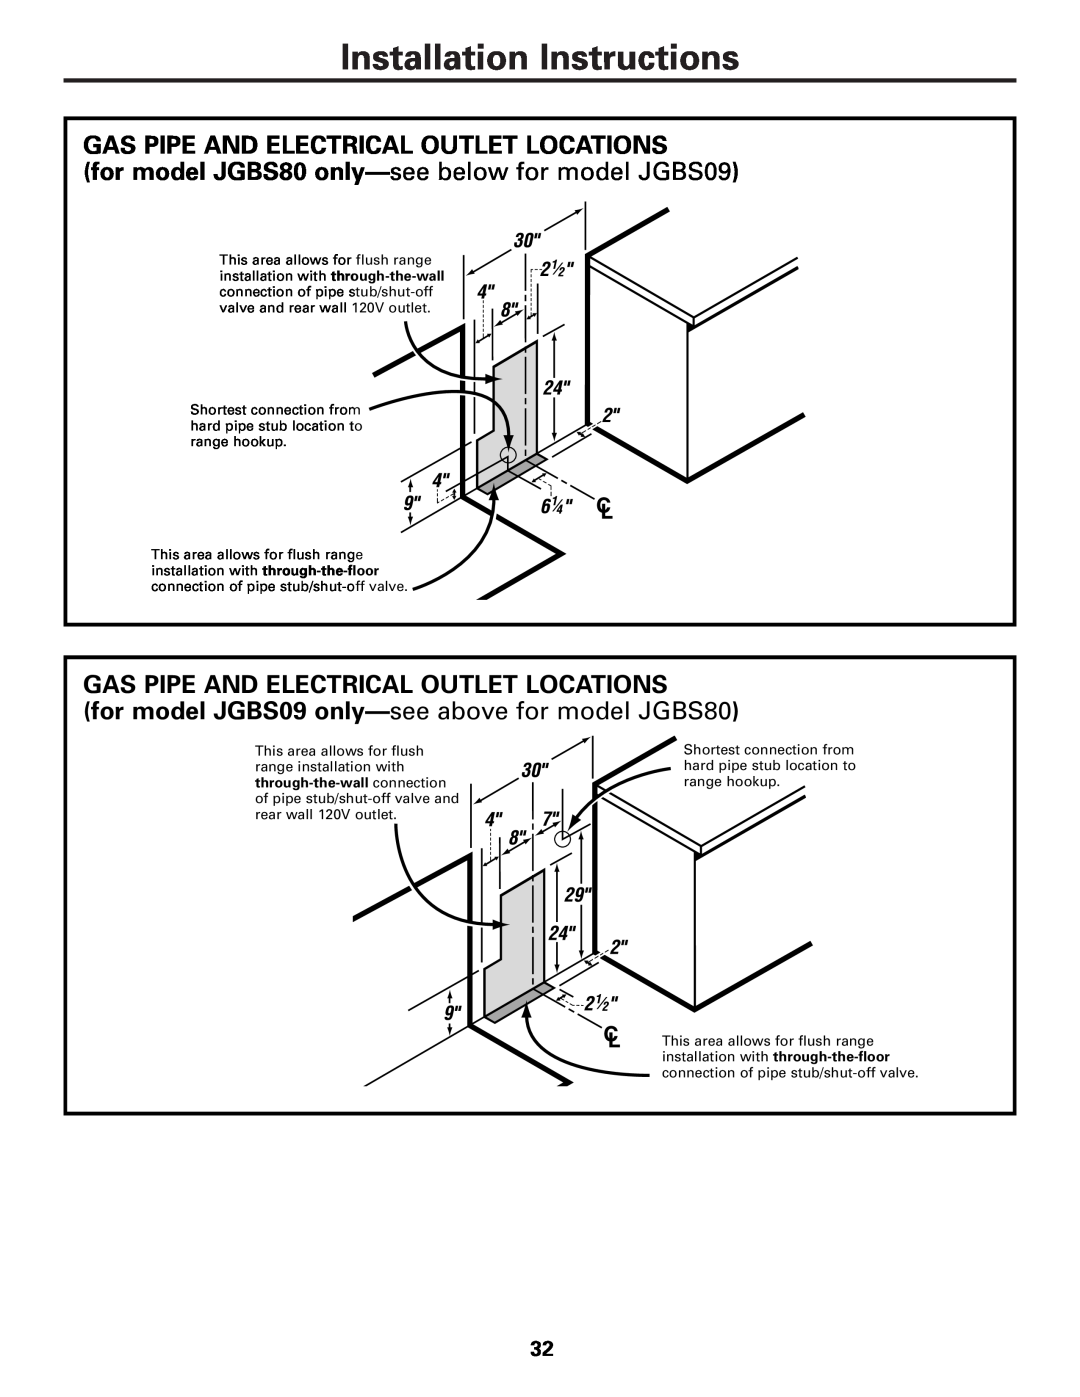 GE JGBS80 installation instructions Installation Instructions, Gas Pipe And Electrical Outlet Locations 